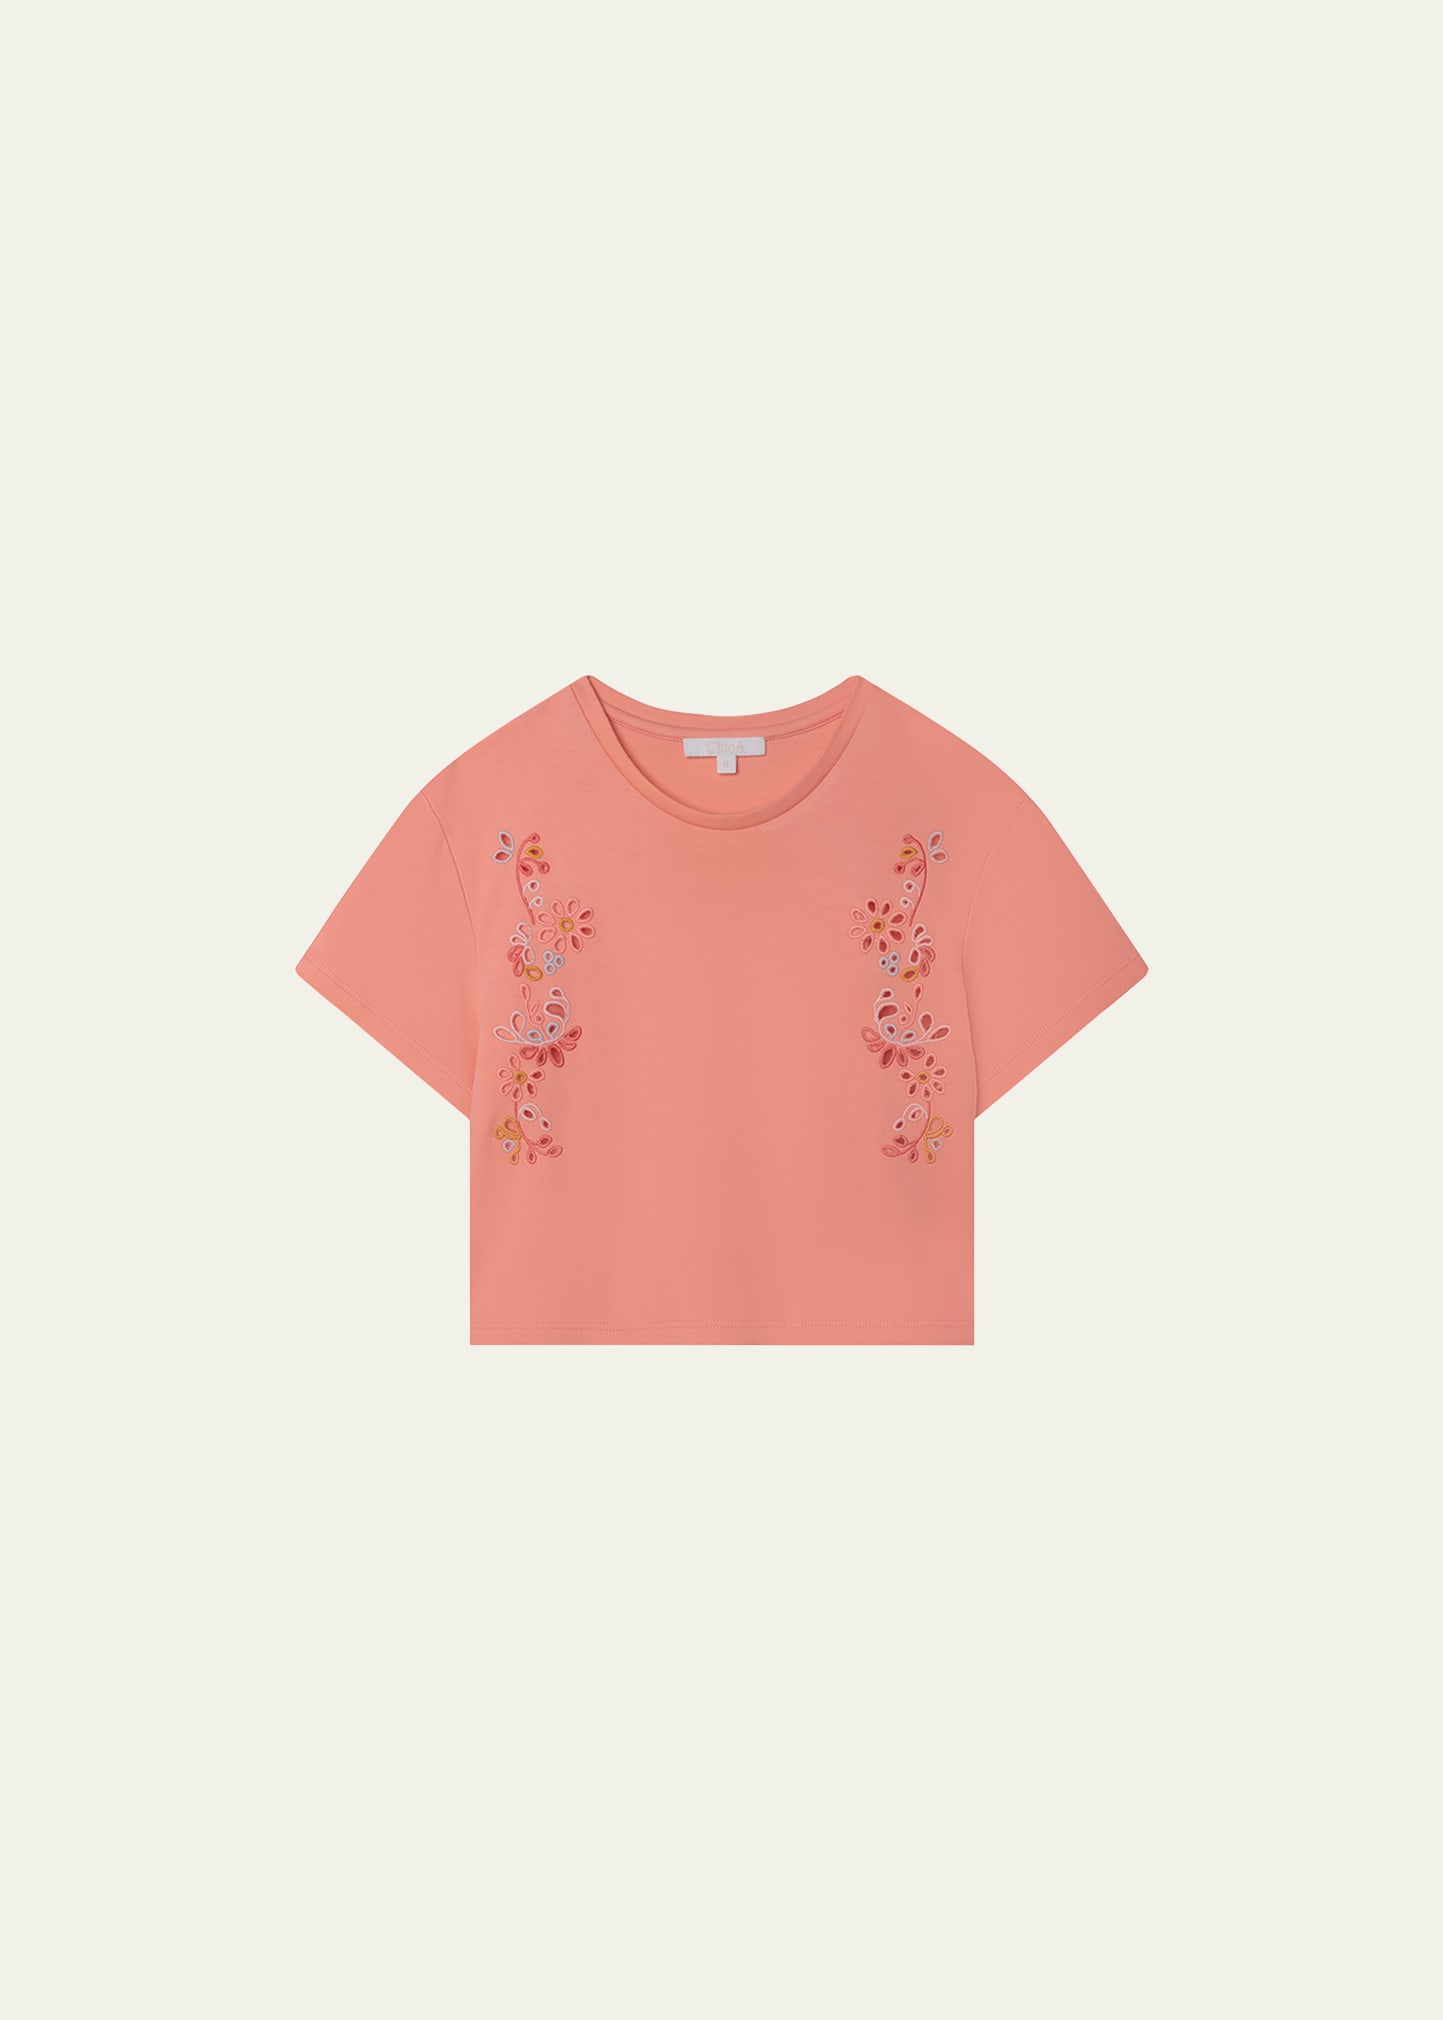 CHLOÉ GIRL'S FLORAL-EMBROIDERED CROPPED T-SHIRT